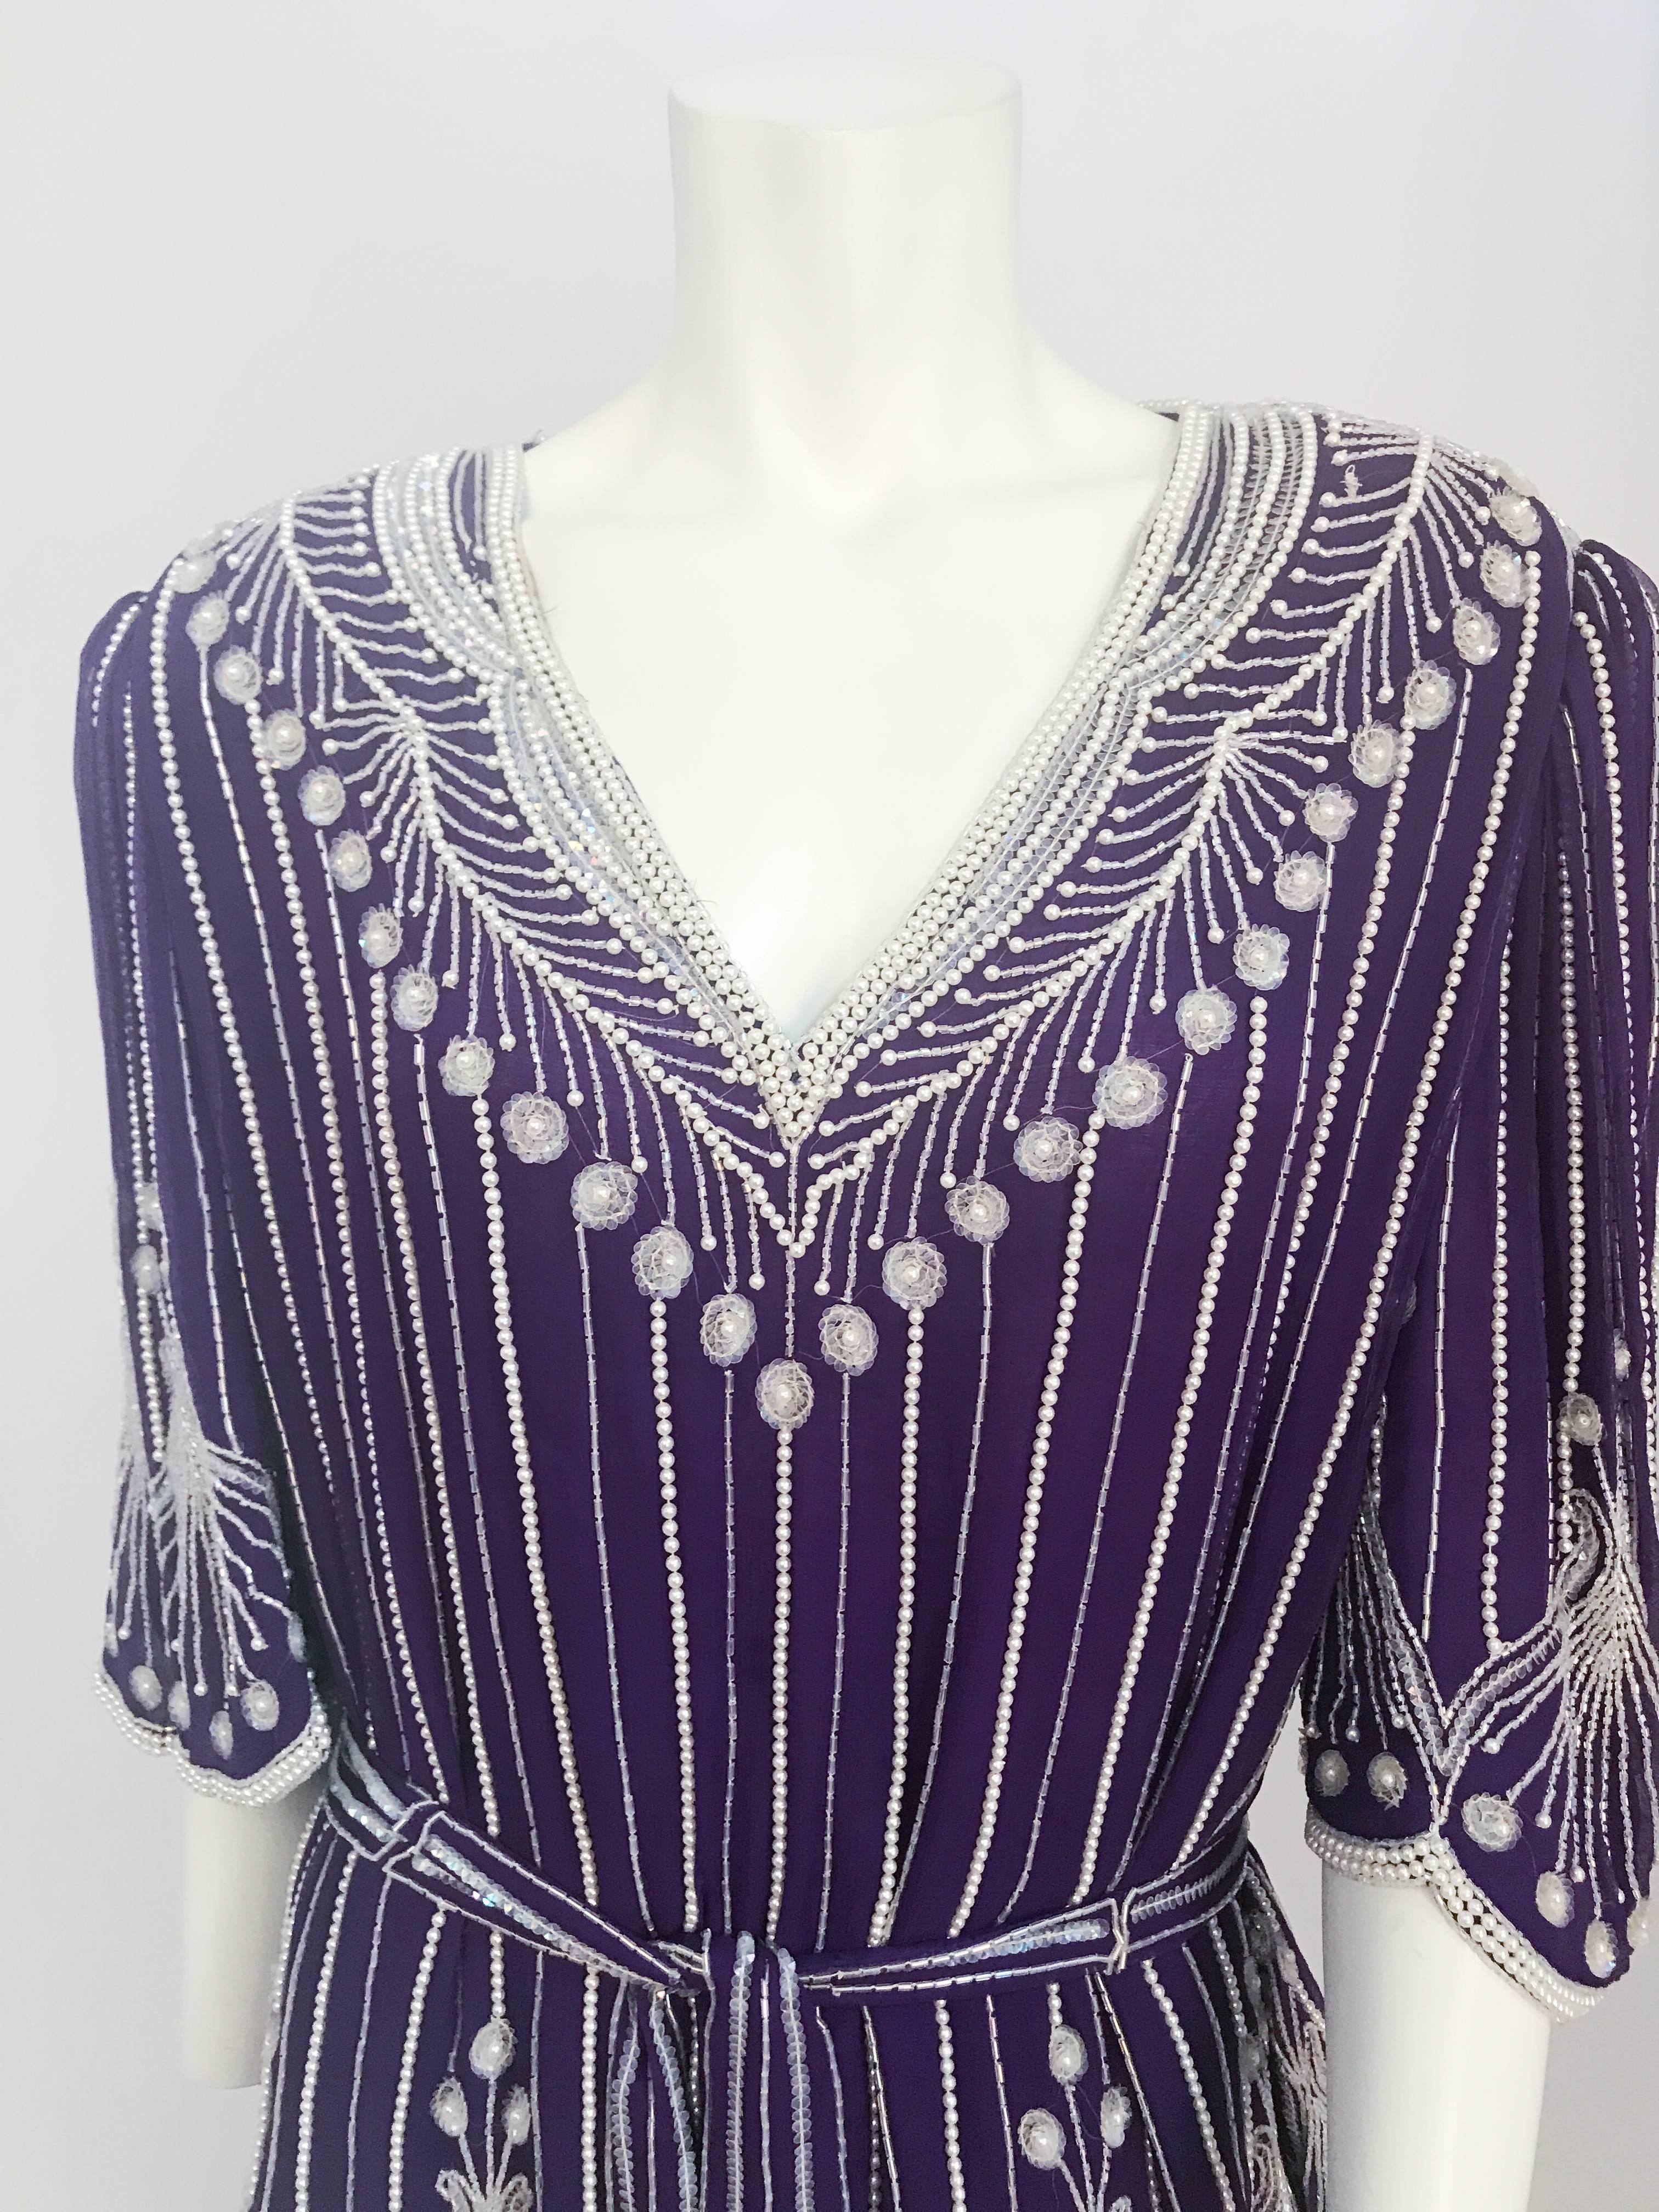 Neiman Marcus Purple Beaded Ensemble Skirt Set, 1980s  In Good Condition For Sale In San Francisco, CA